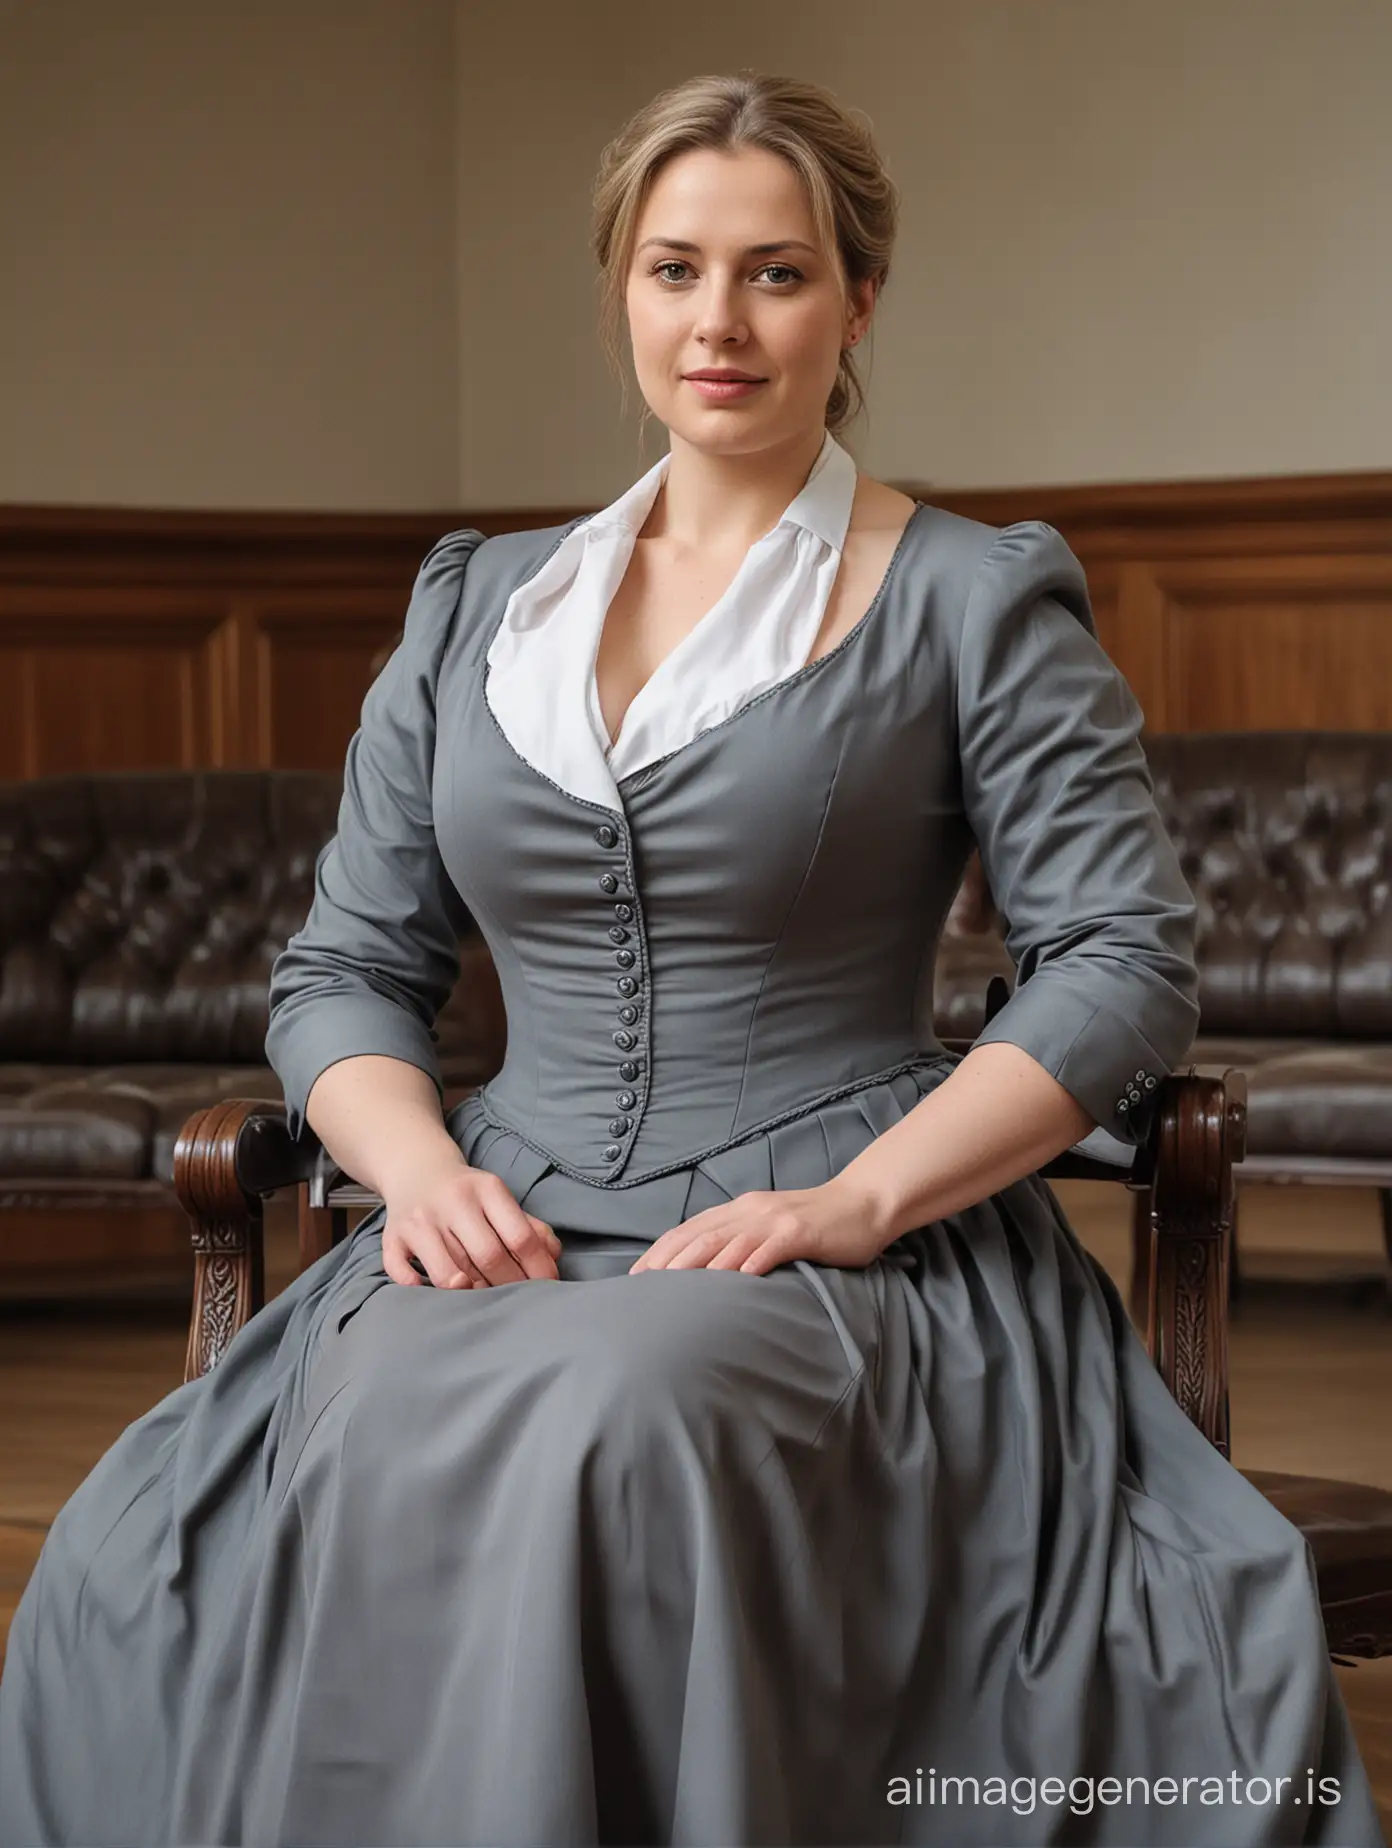 Authoritative-German-Governess-Awaits-in-Grand-Hall